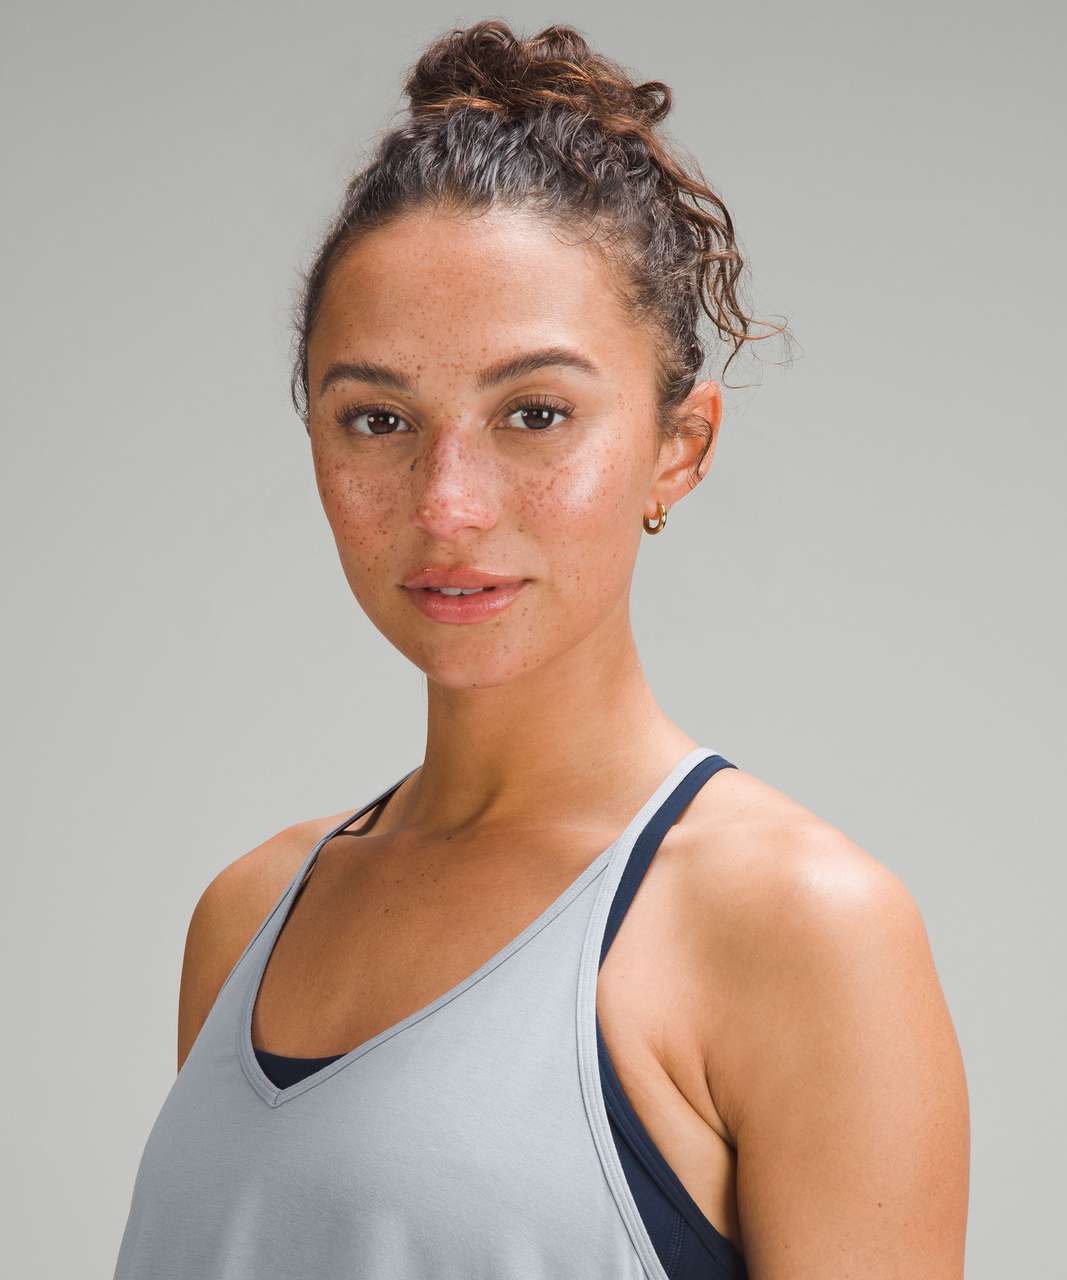 lululemon athletica Chambray Tank Tops & Camisoles